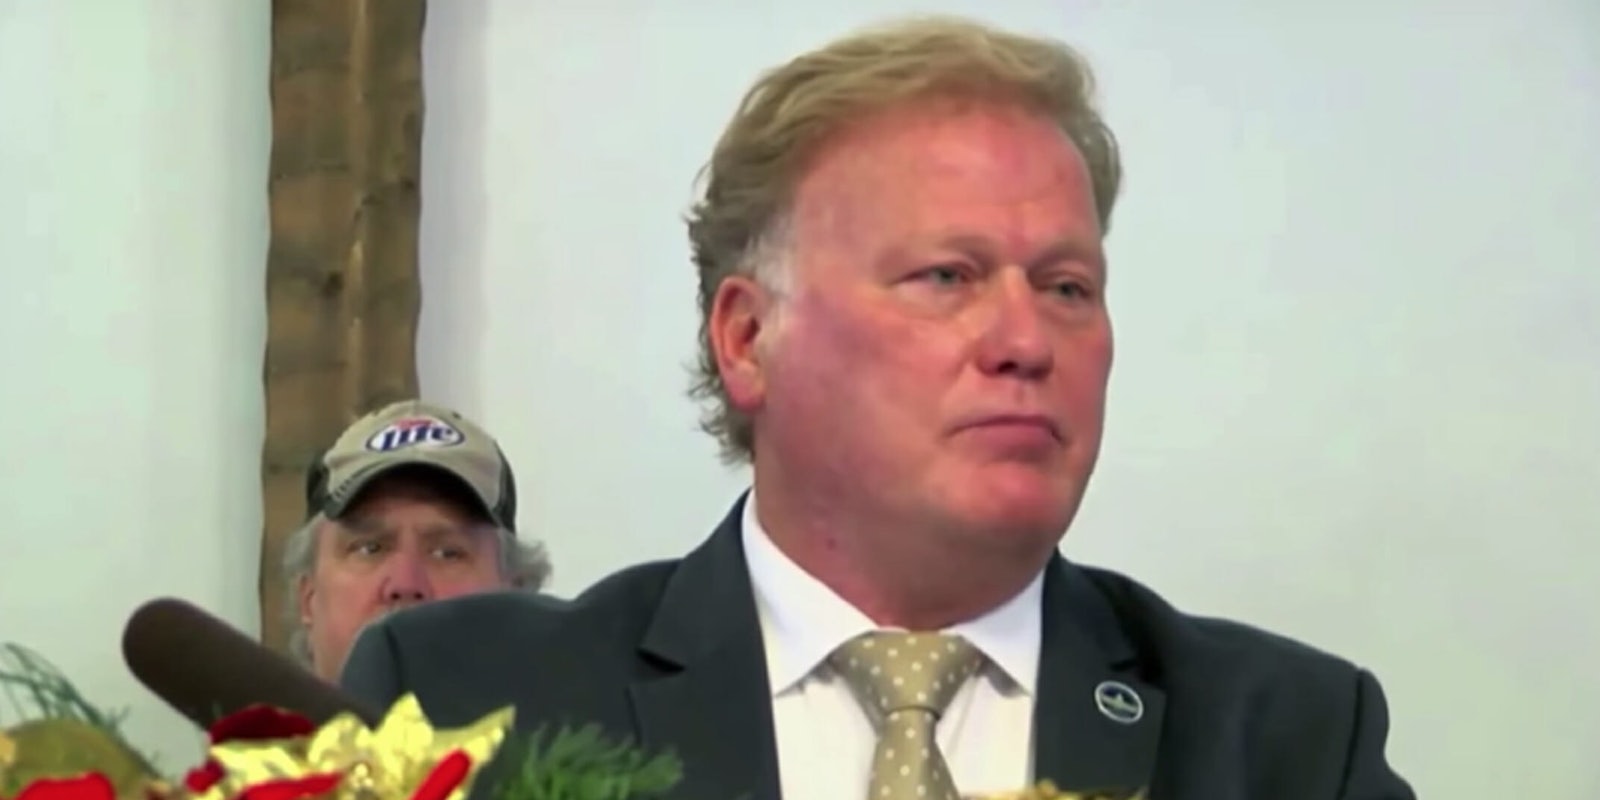 Dan Johnson was reported dead from 'probably suicide' just days after being accused of sexual assault.